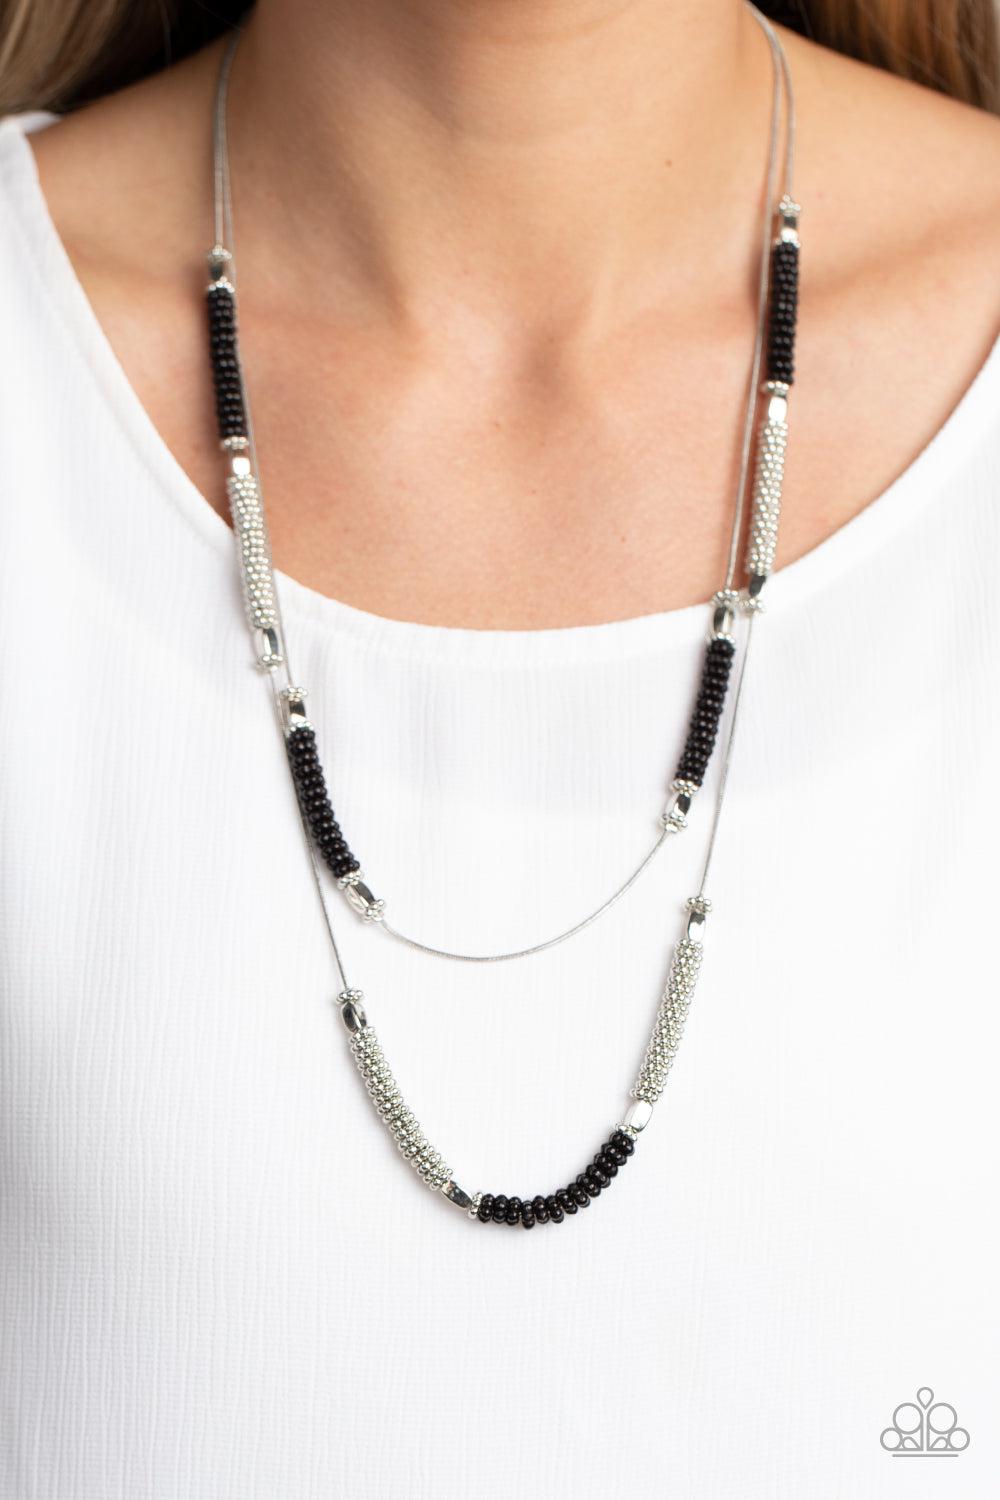 Caviar Chic Black &amp; Silver Necklace - Paparazzi Accessories-on model - CarasShop.com - $5 Jewelry by Cara Jewels